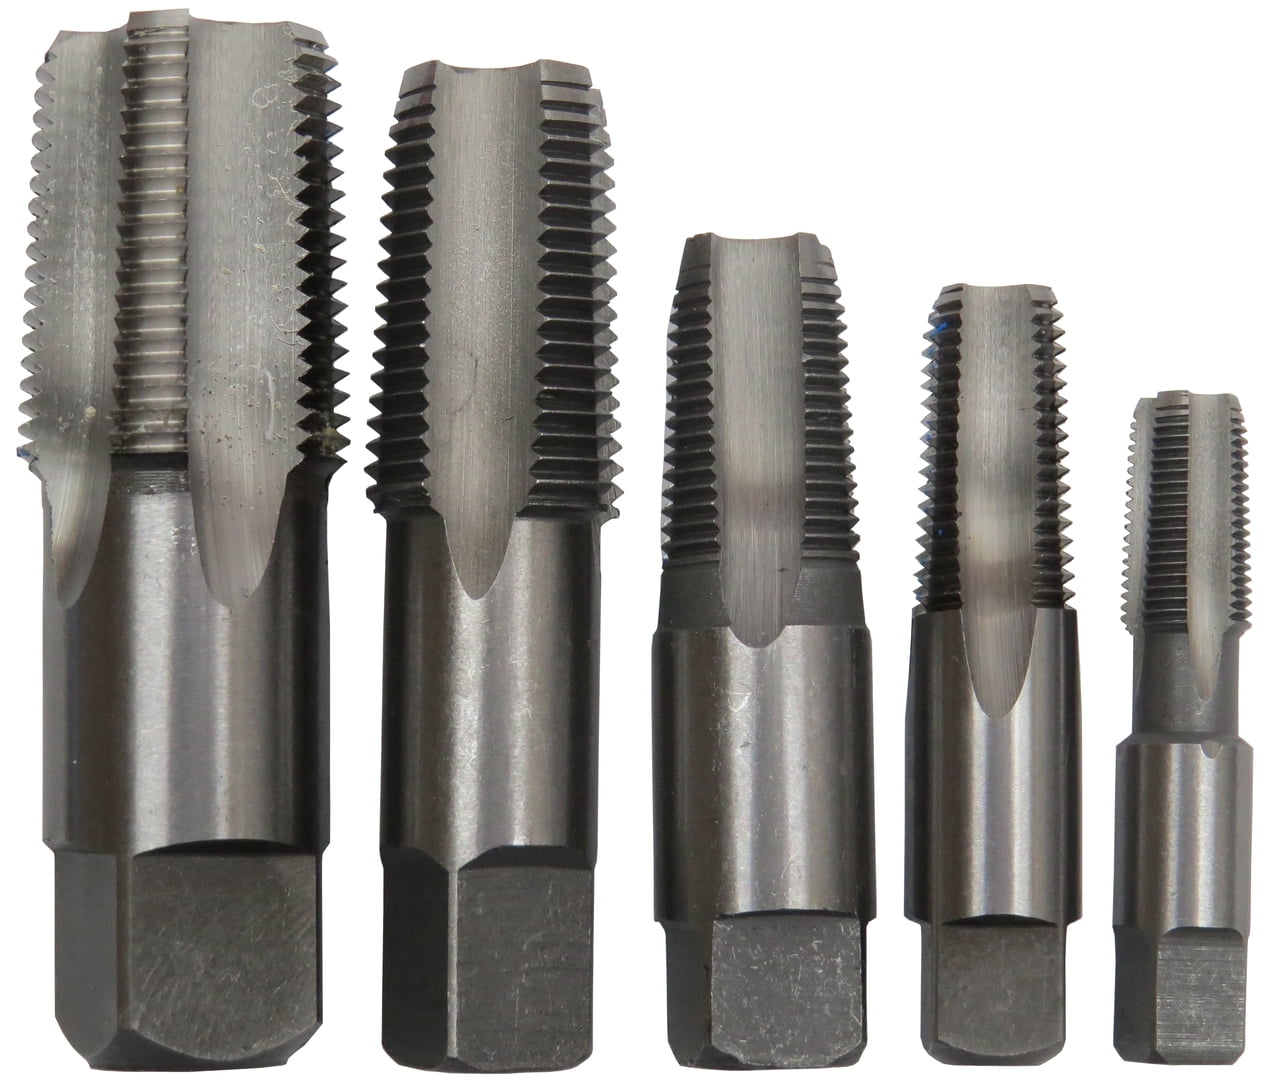 QWORK 1/8-27 NPT Pipe Tap for Clean and Re-thread Damaged or Jam Pipe Threads Carbon Steel 